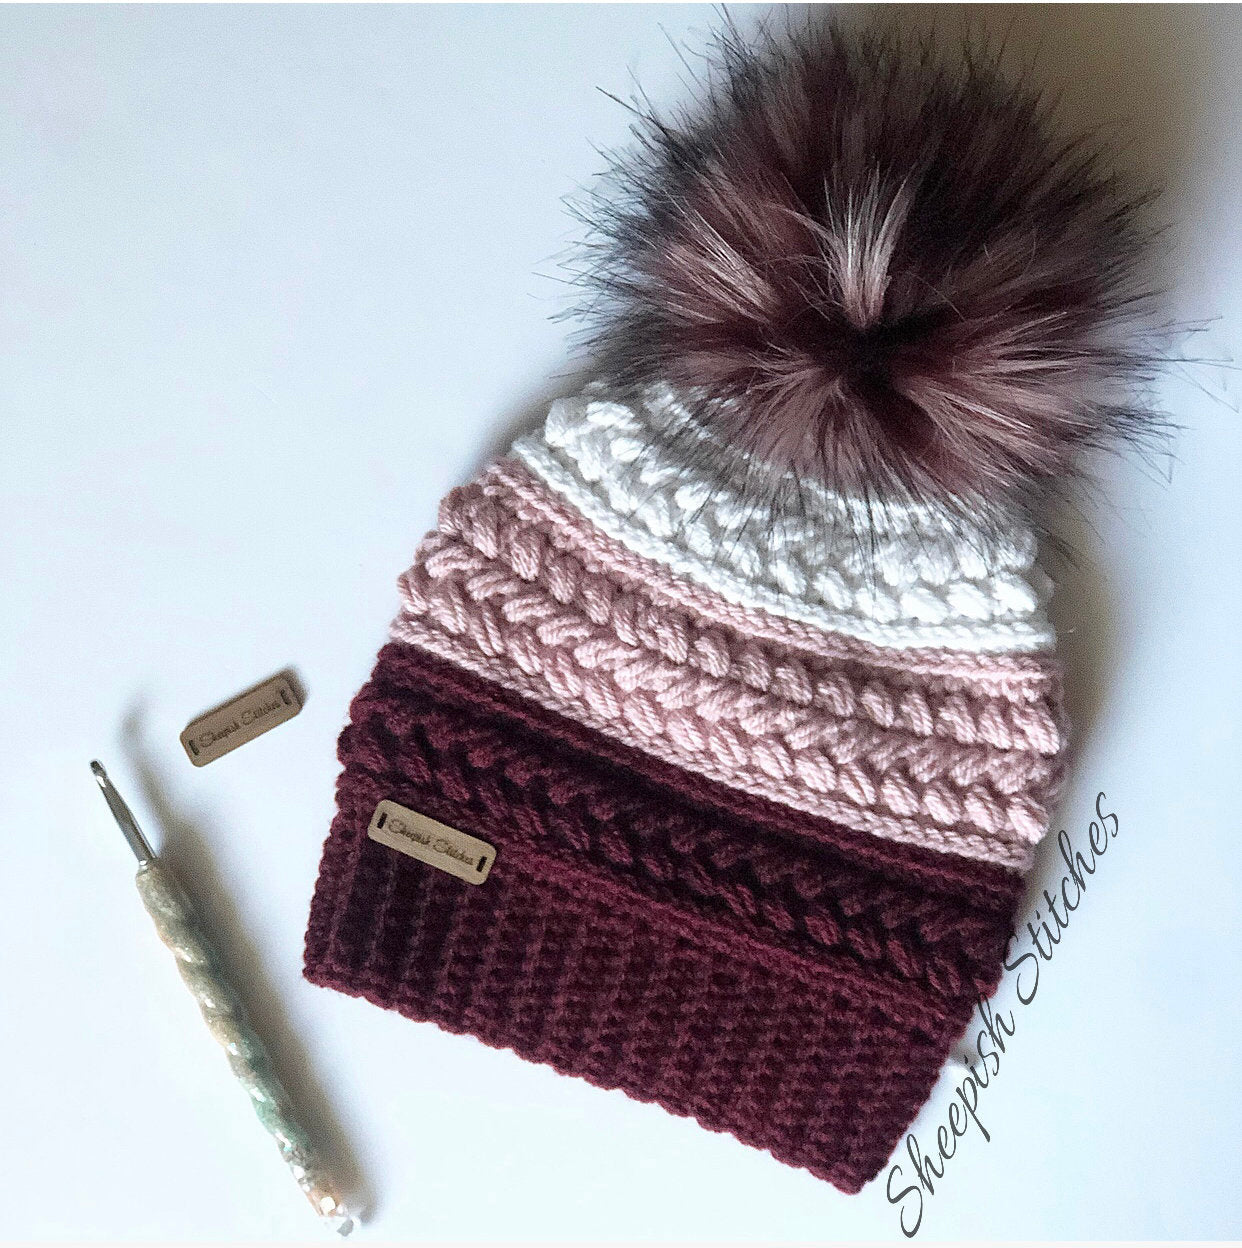 Burgundy, Blush, and White Hand Crocheted Beanie with faux fur Pom Pom, toque, hat, cap, woman’s gifts